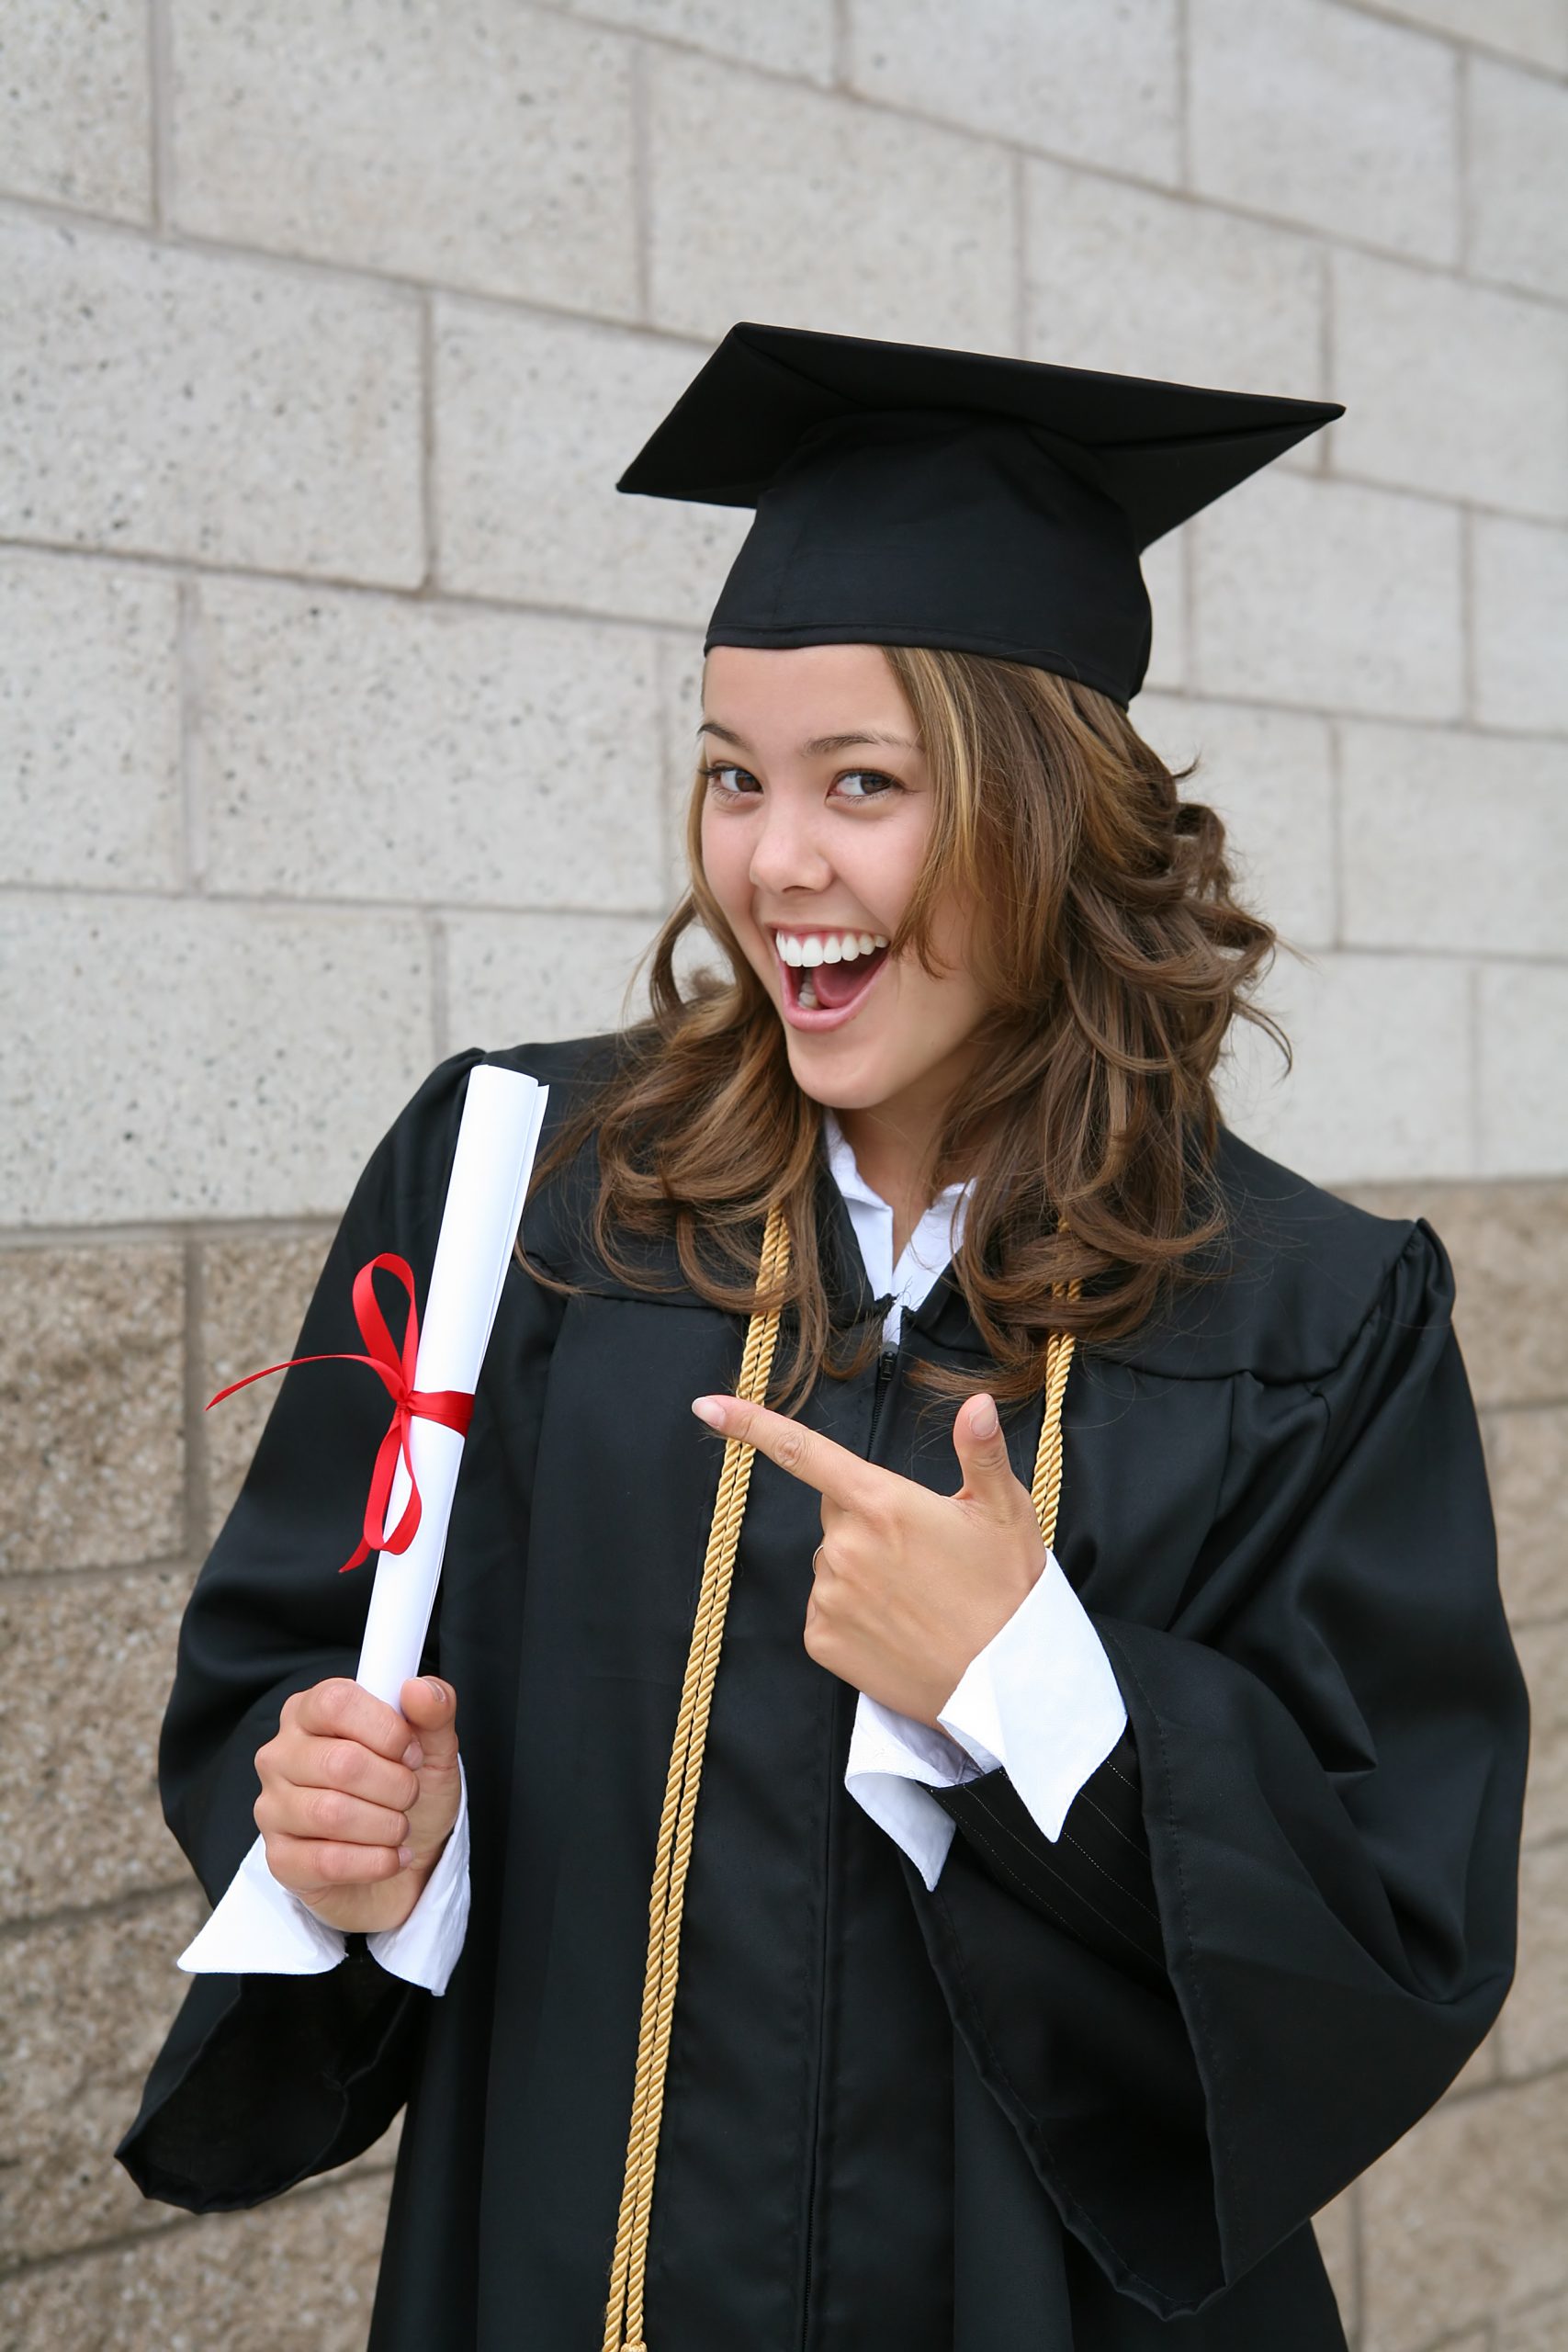 A pretty graduate celebrating her success with diploma